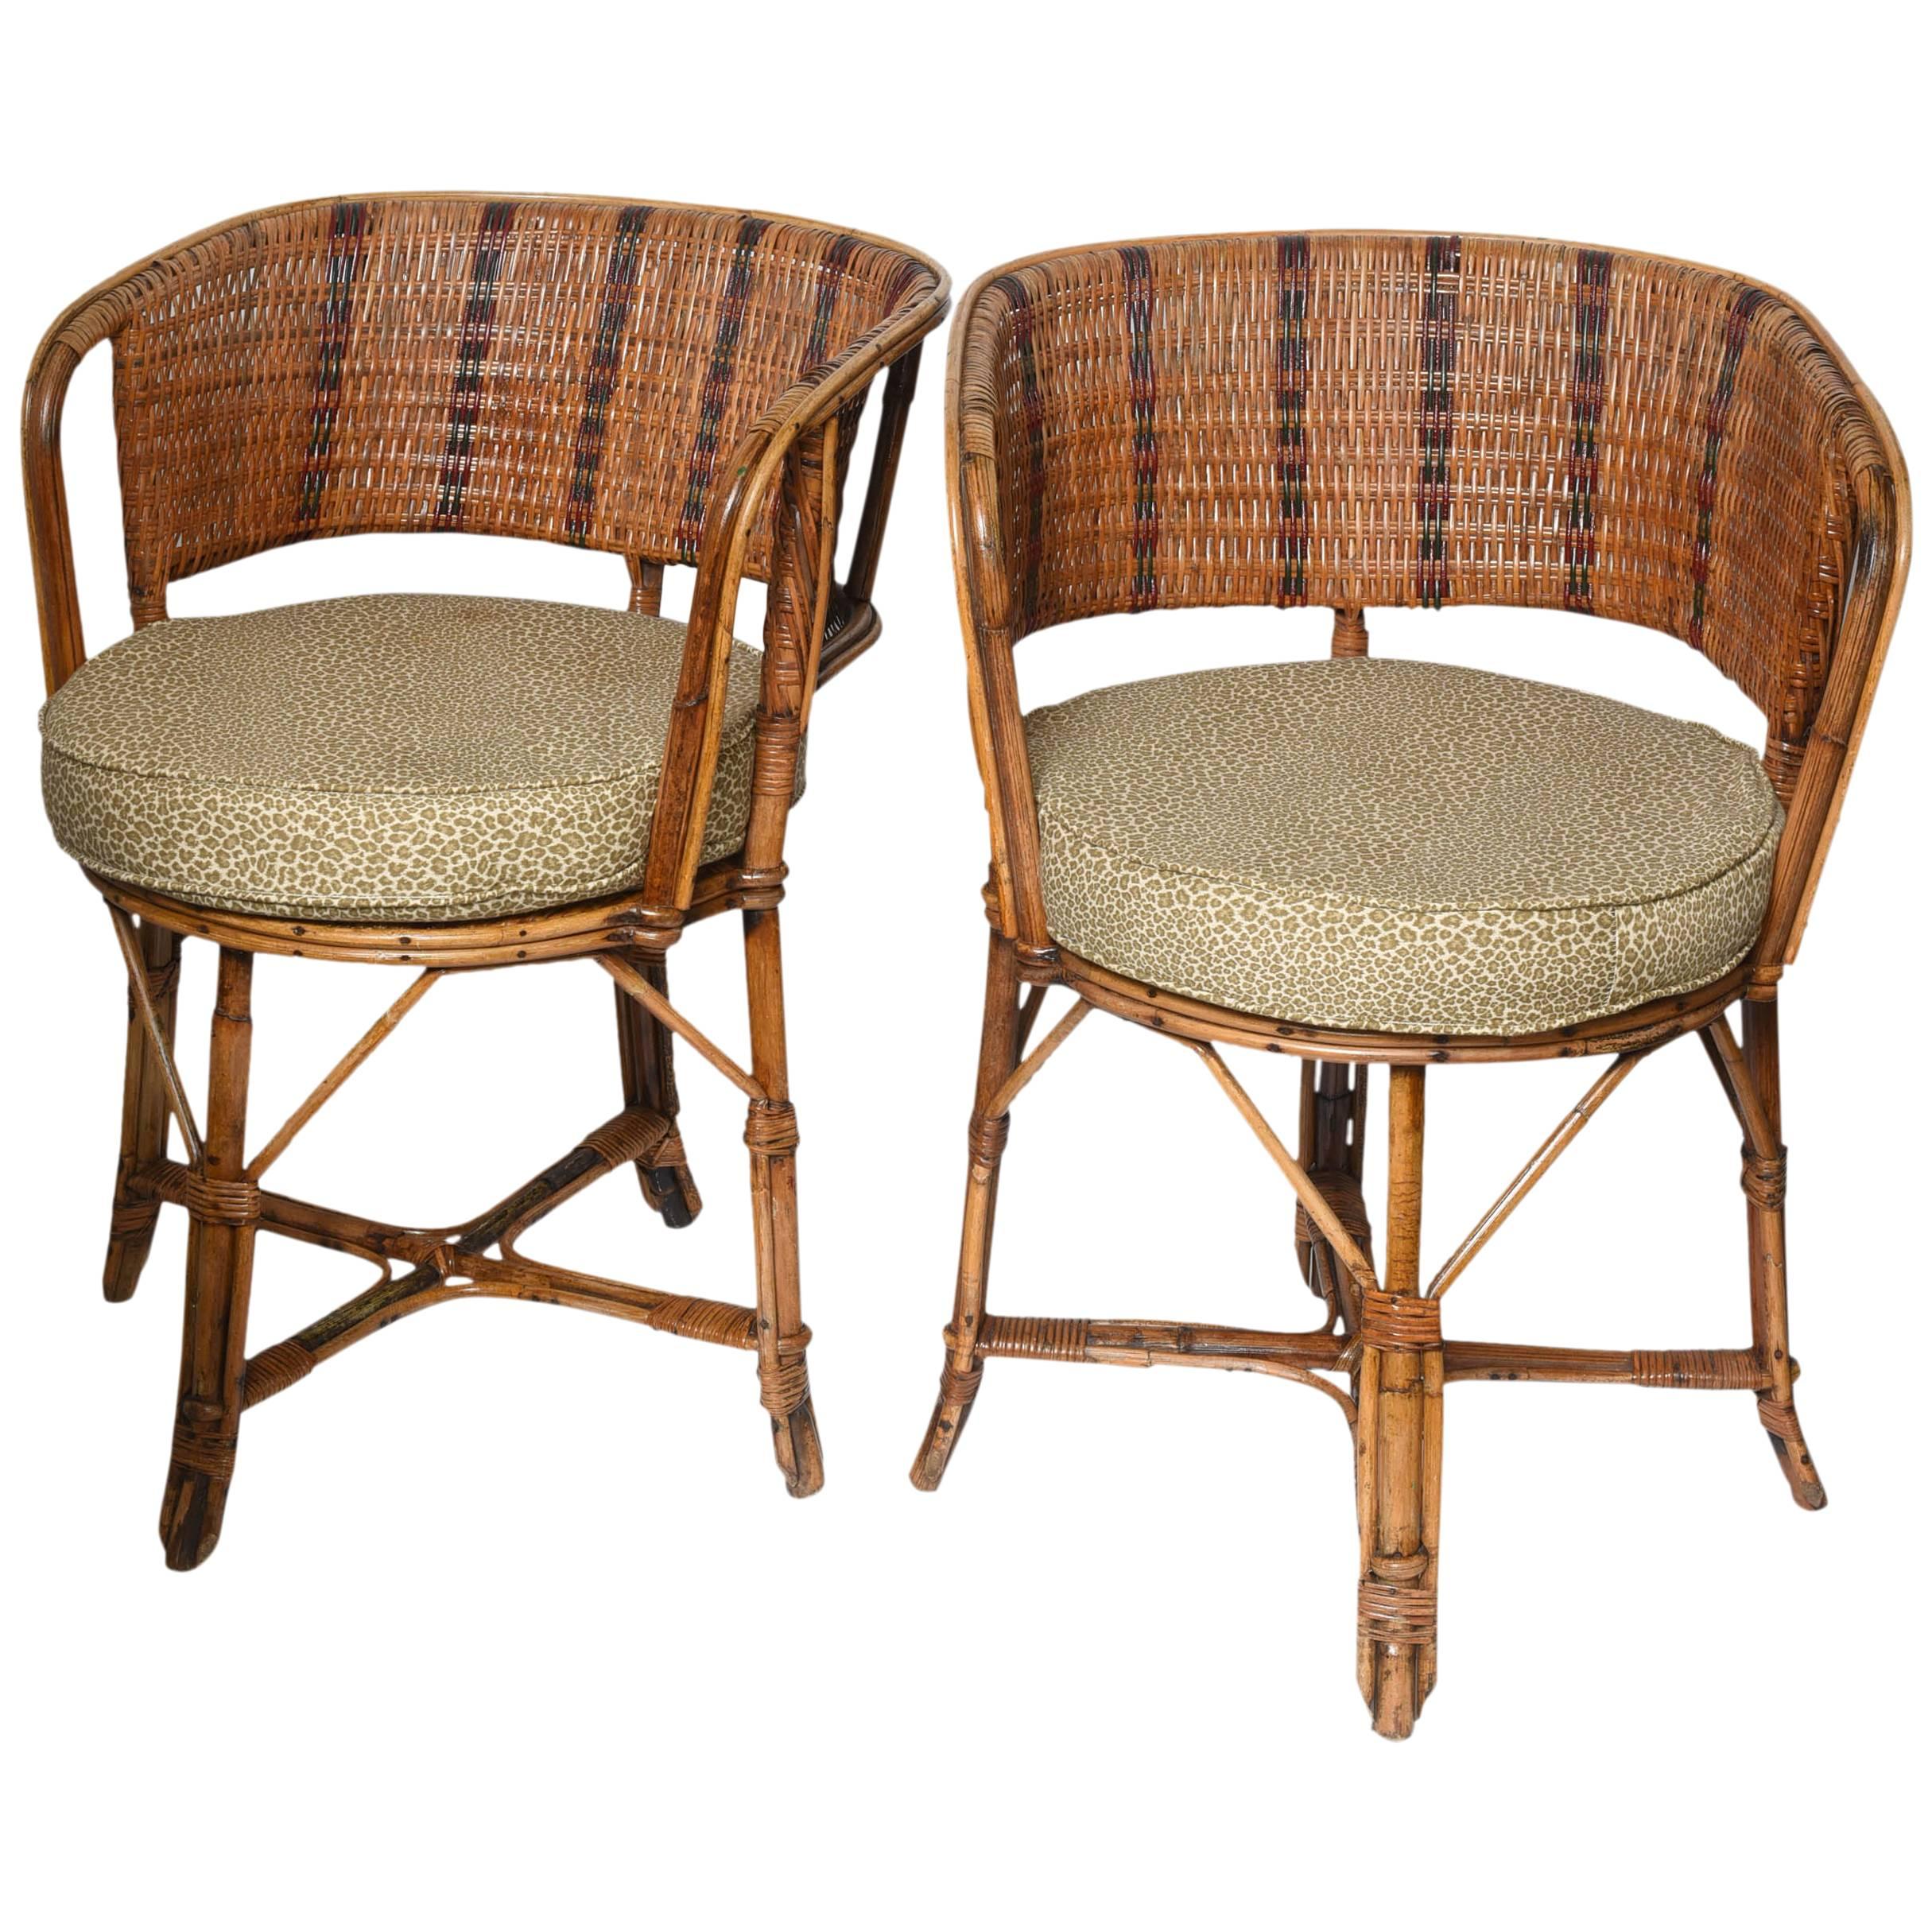 Pair of Vintage French Rattan "Tub" Chairs